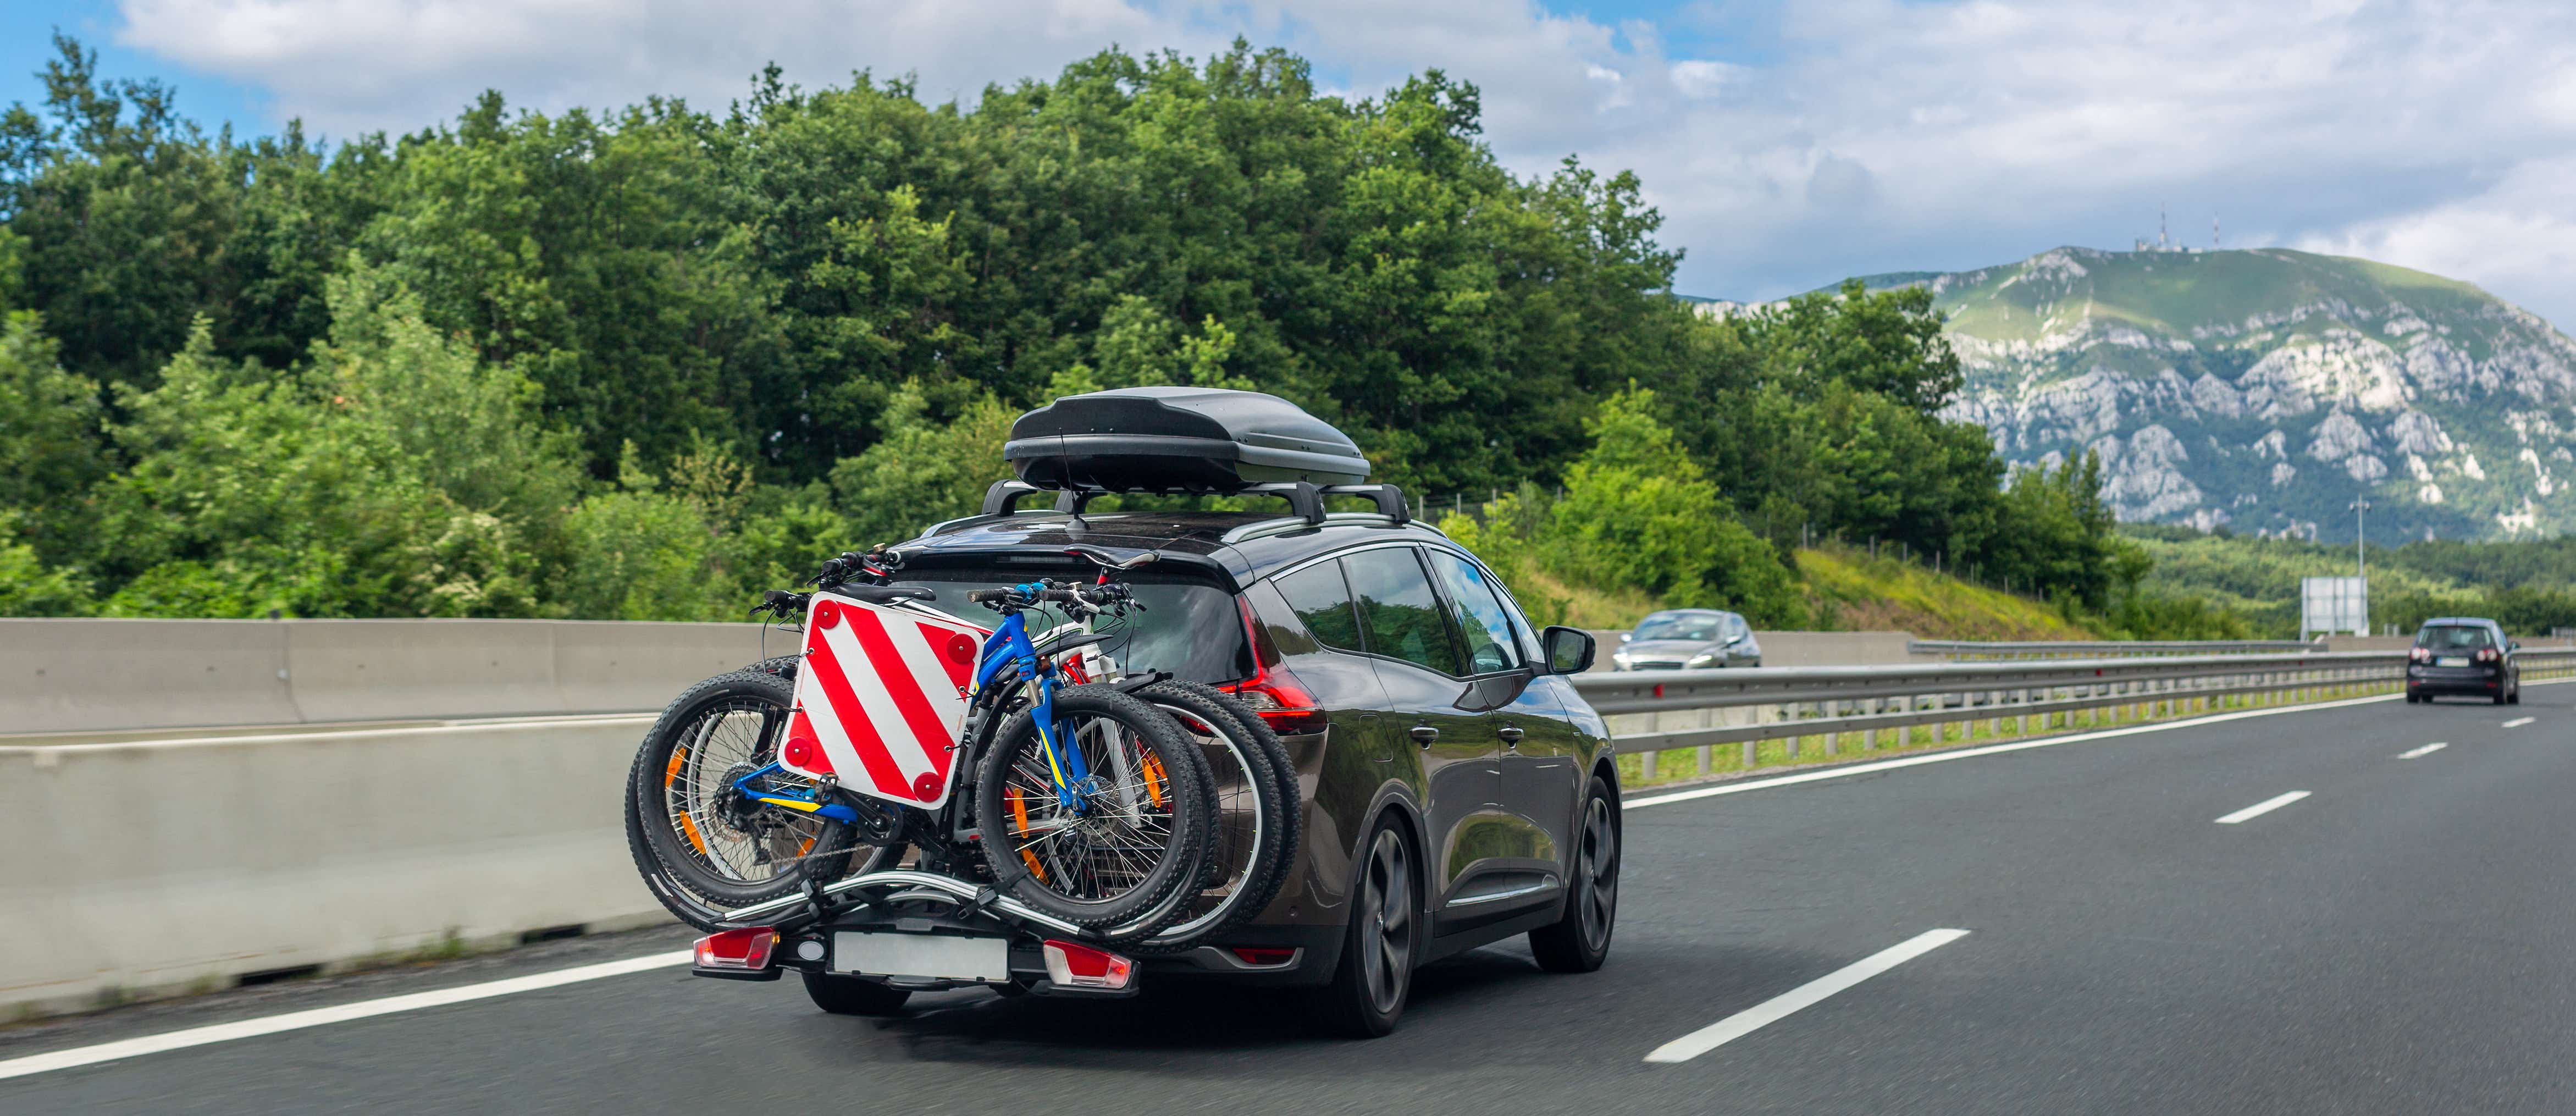 Car with roof box and bike rack 